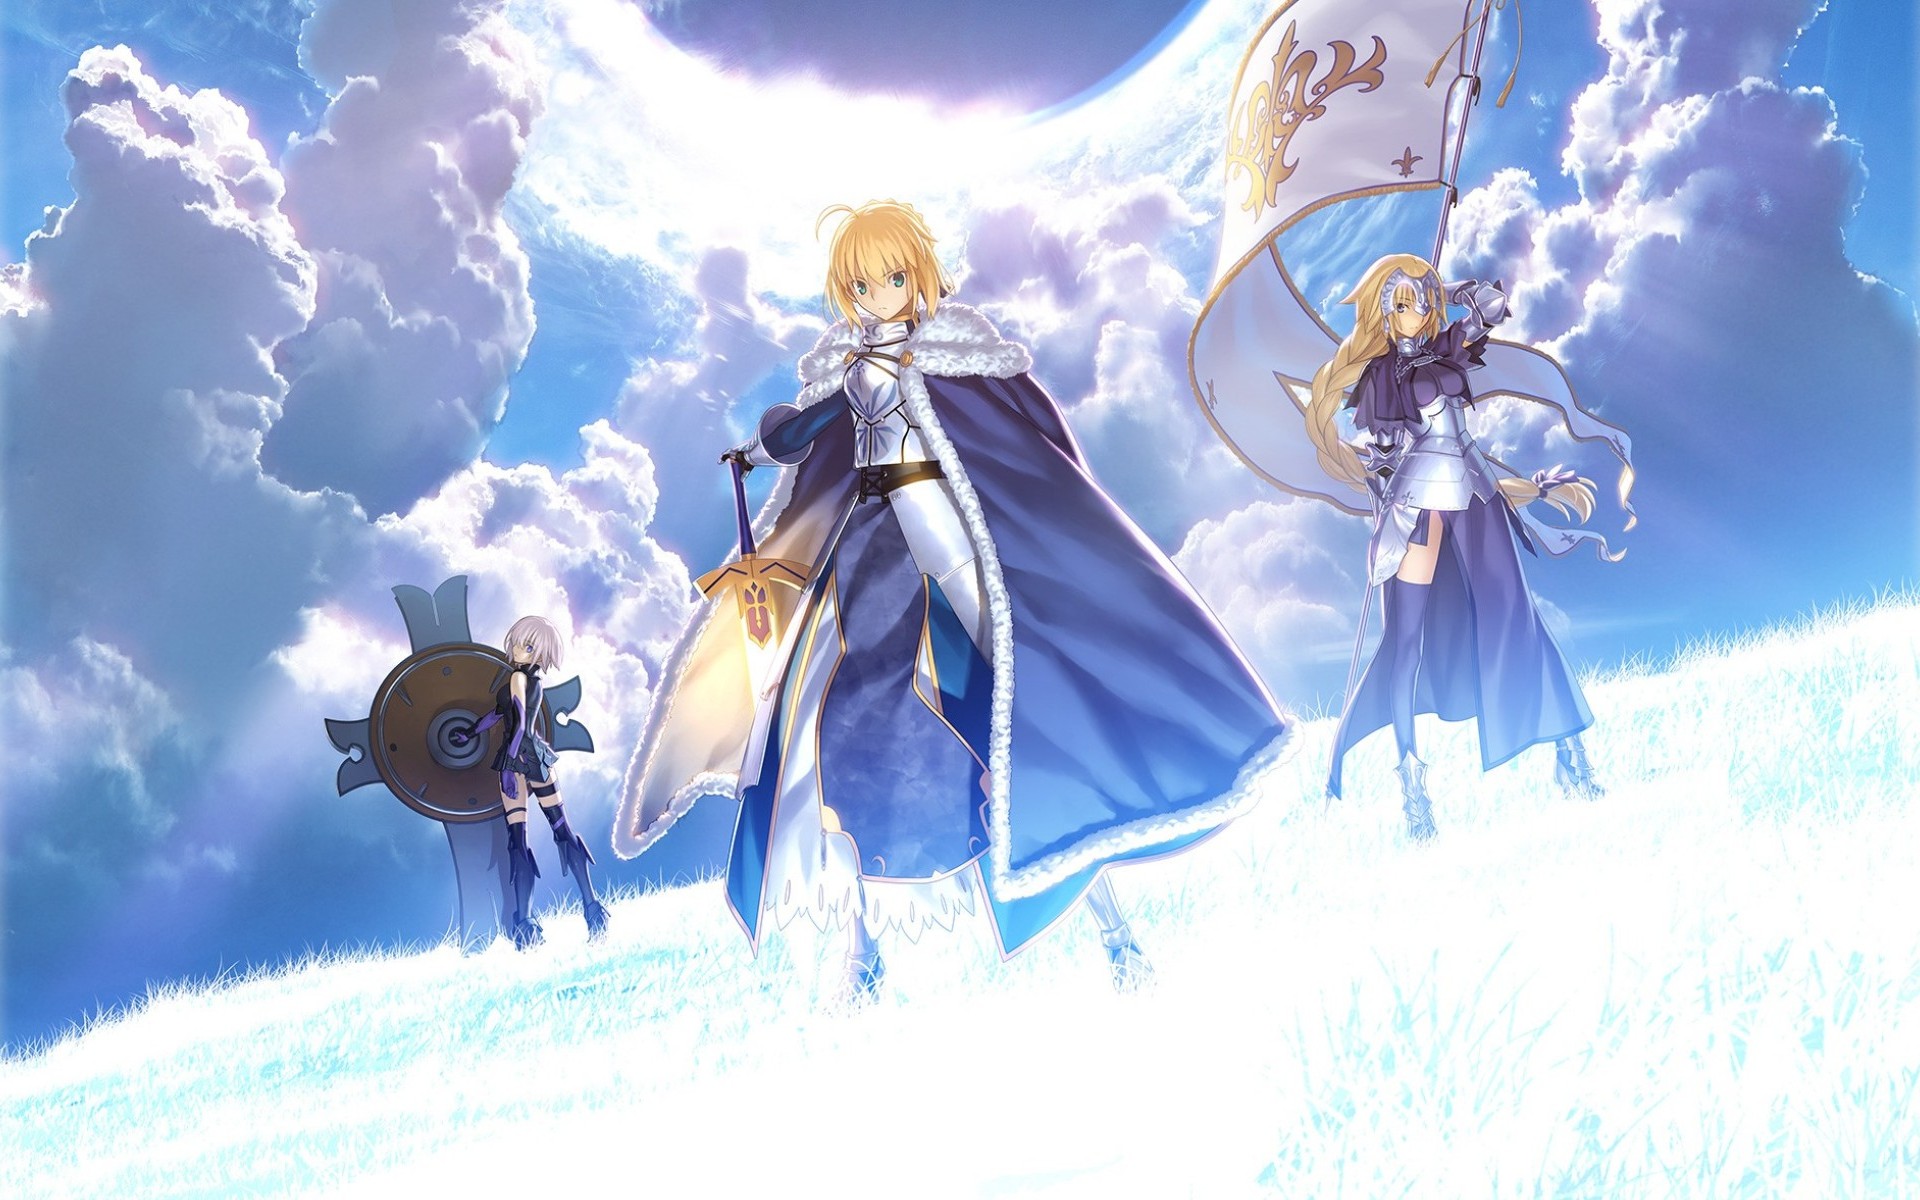 Anime Fate/Grand Order HD Wallpaper by 武内 崇